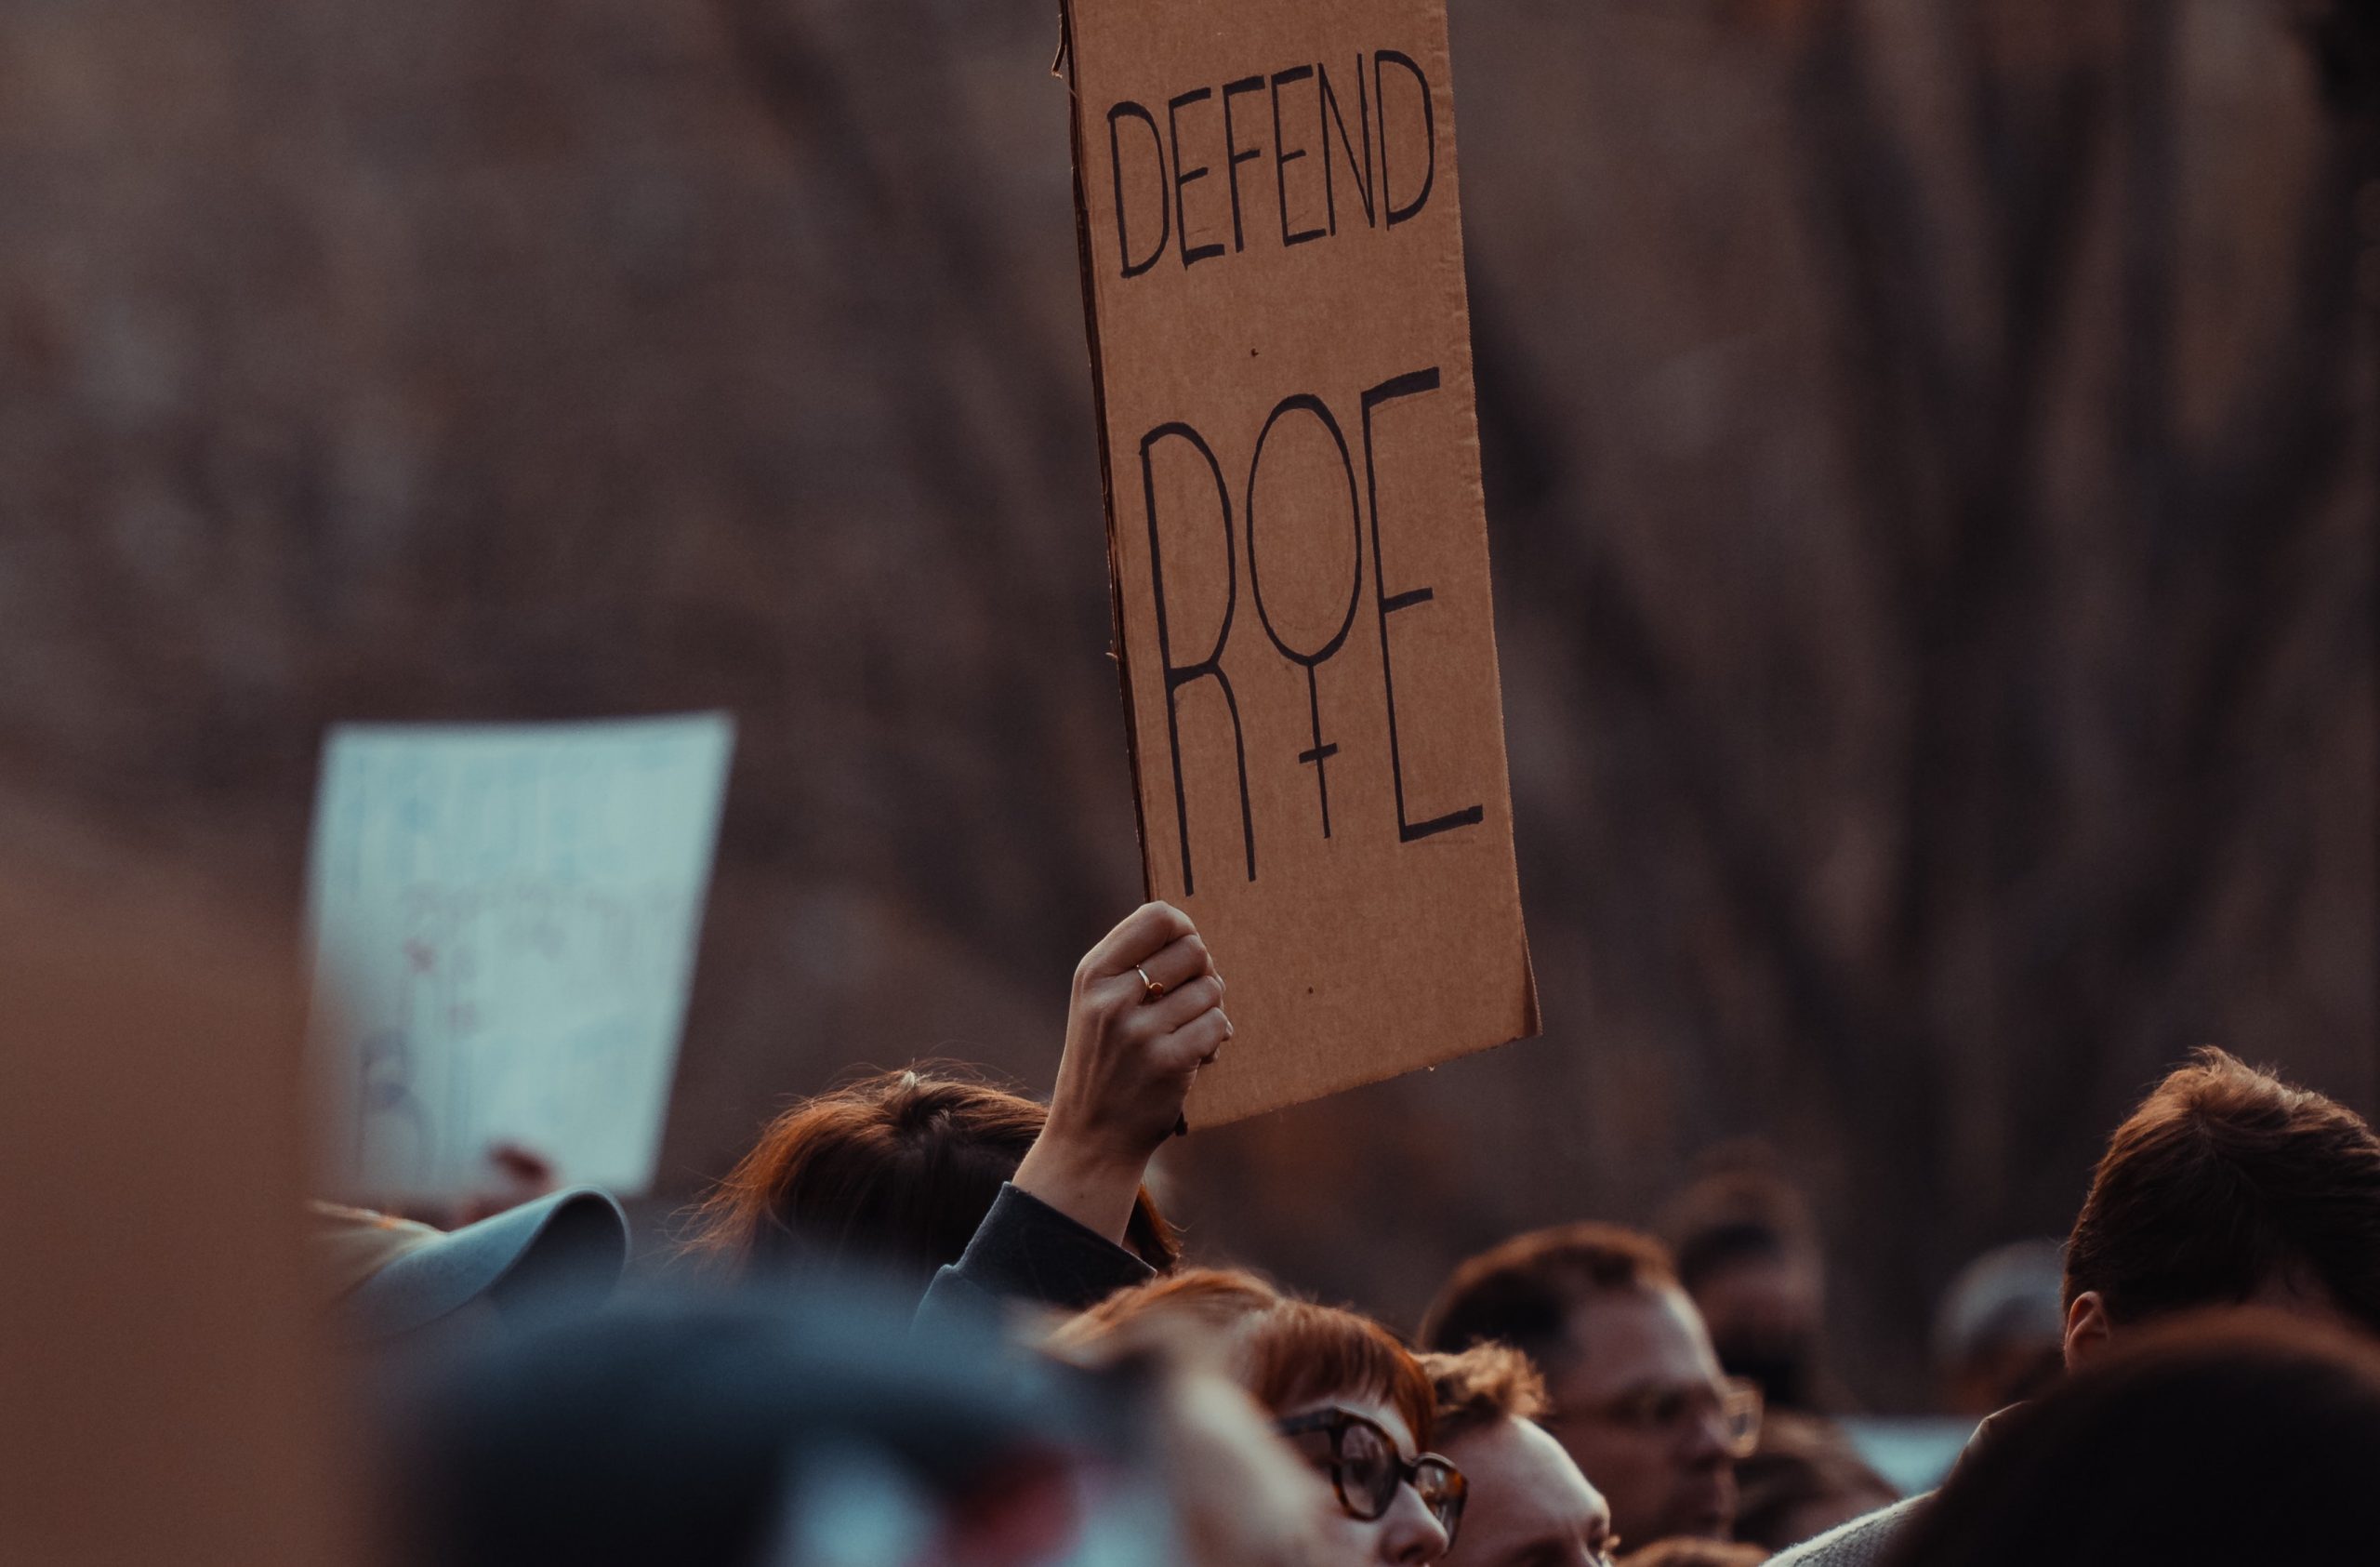 Stock image of person holding Defend Roe cardboard sign